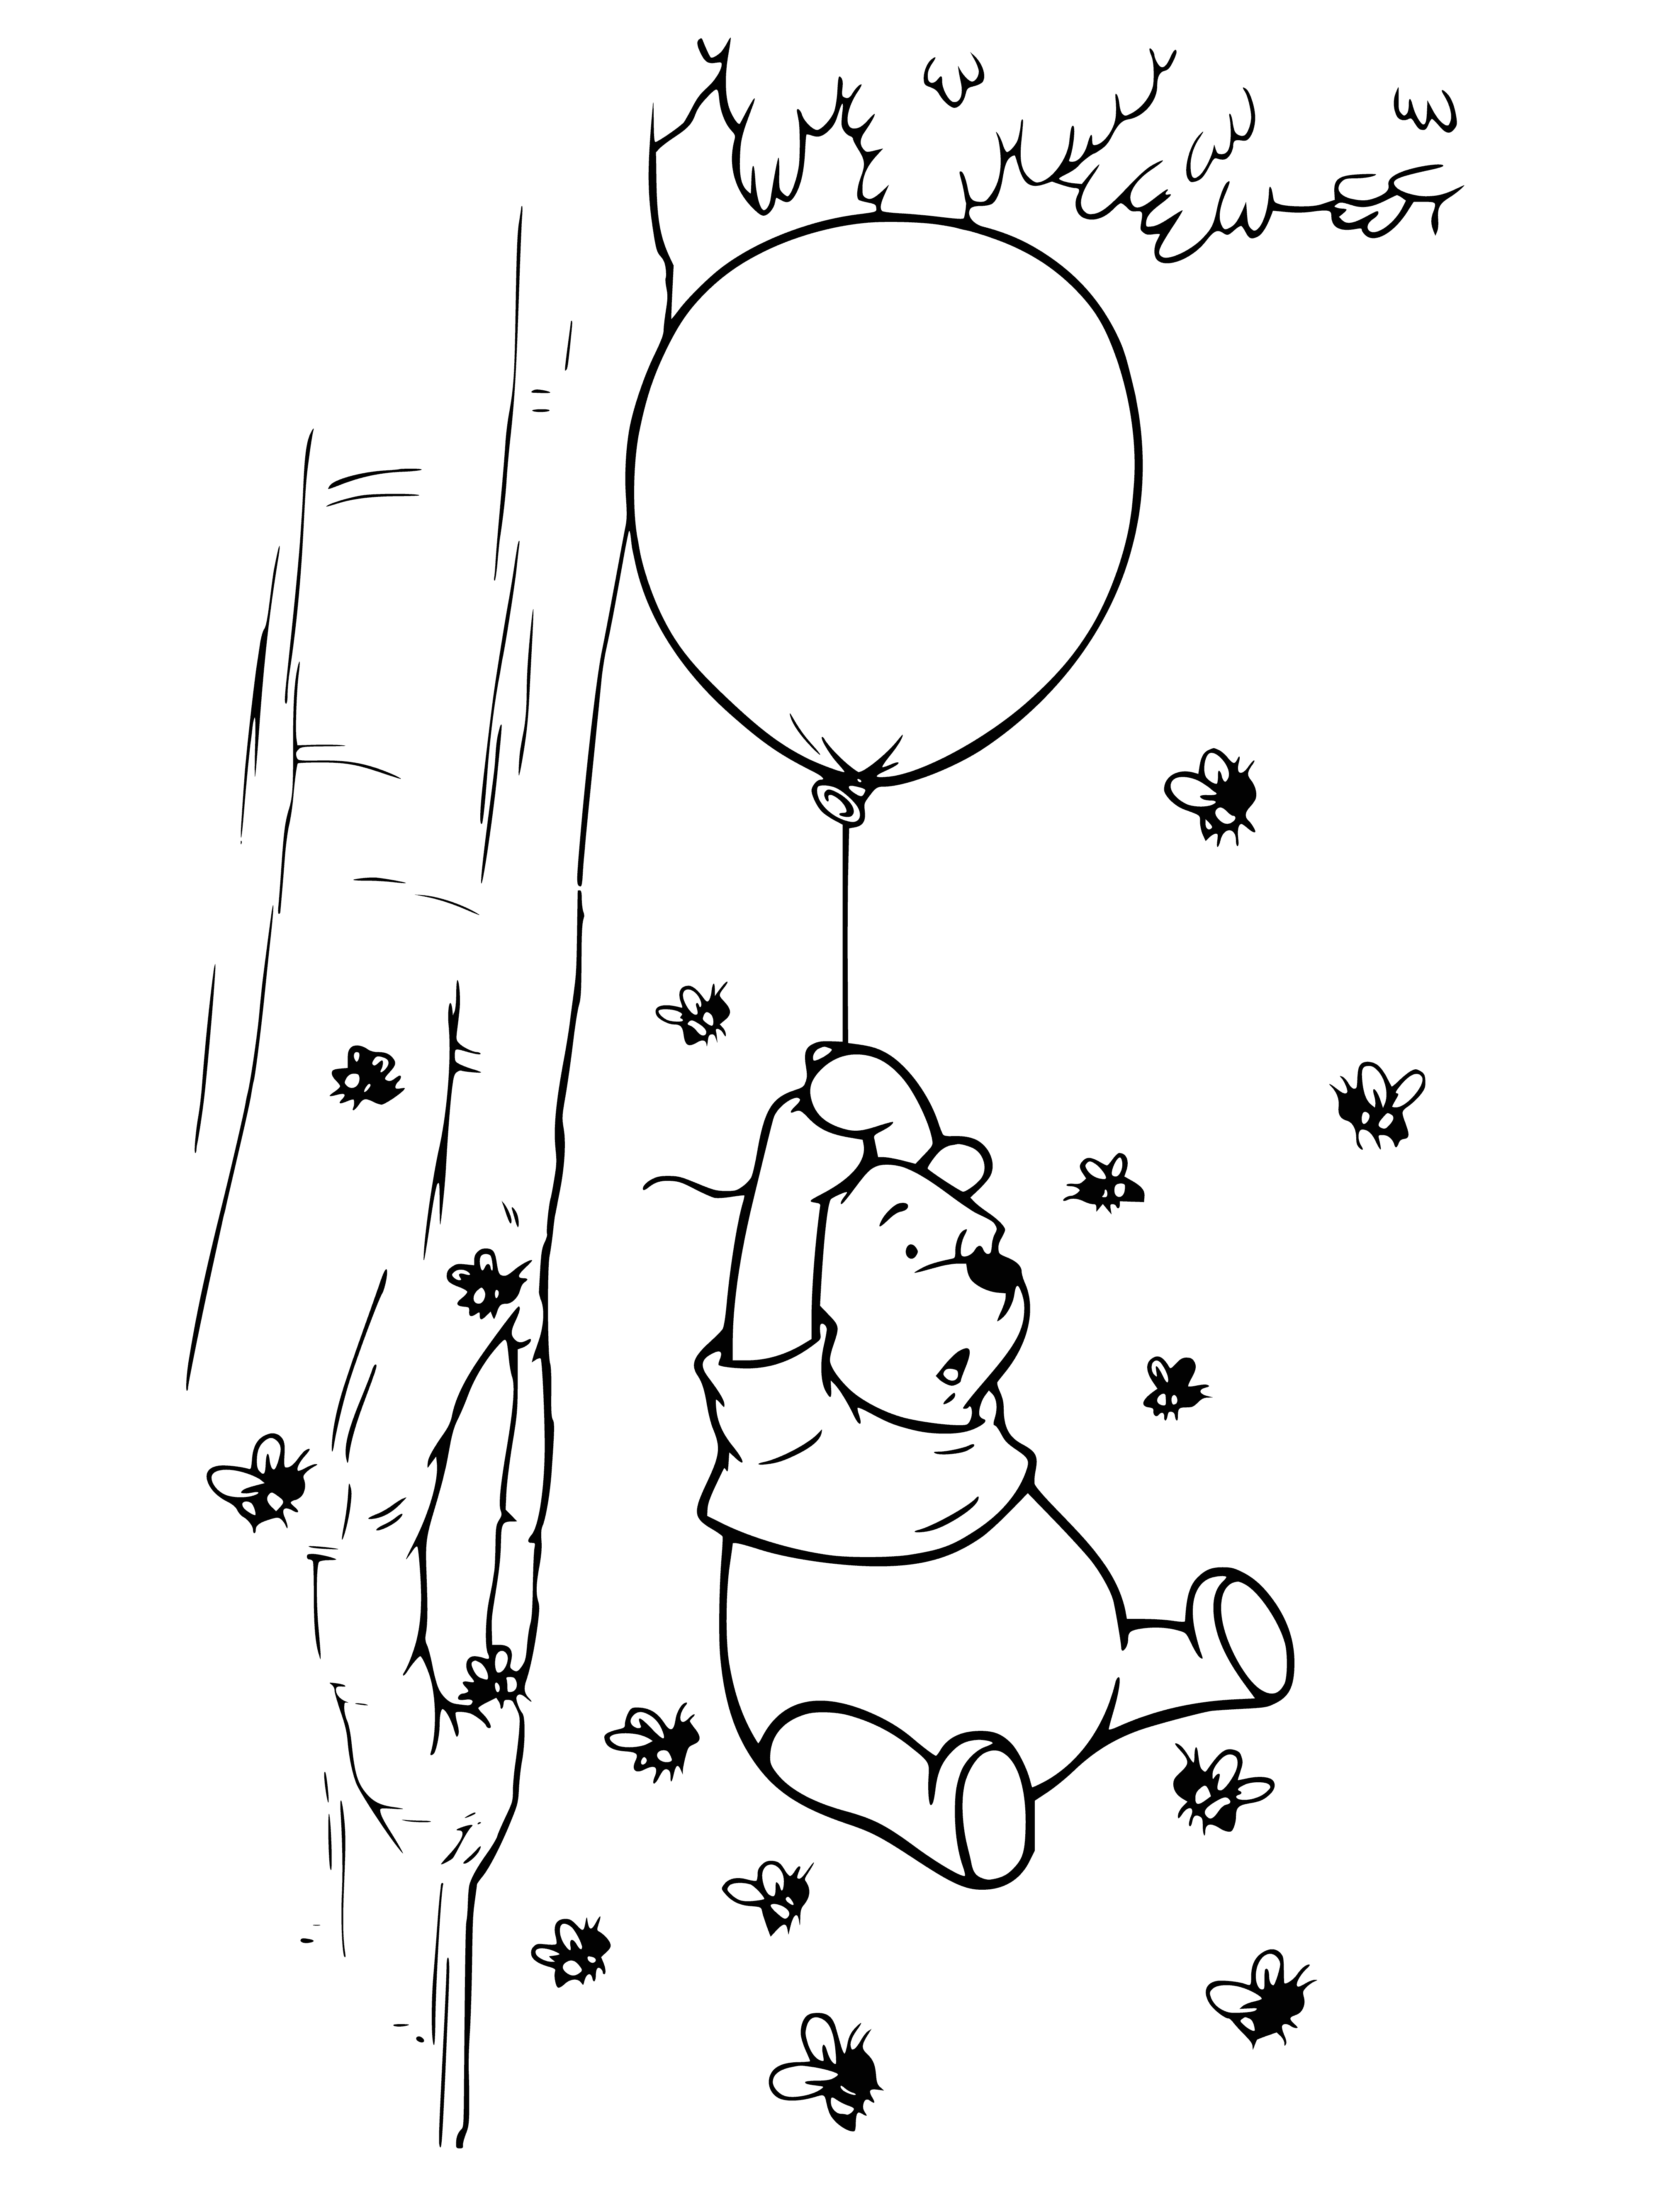 Winnie in a hot air balloon coloring page